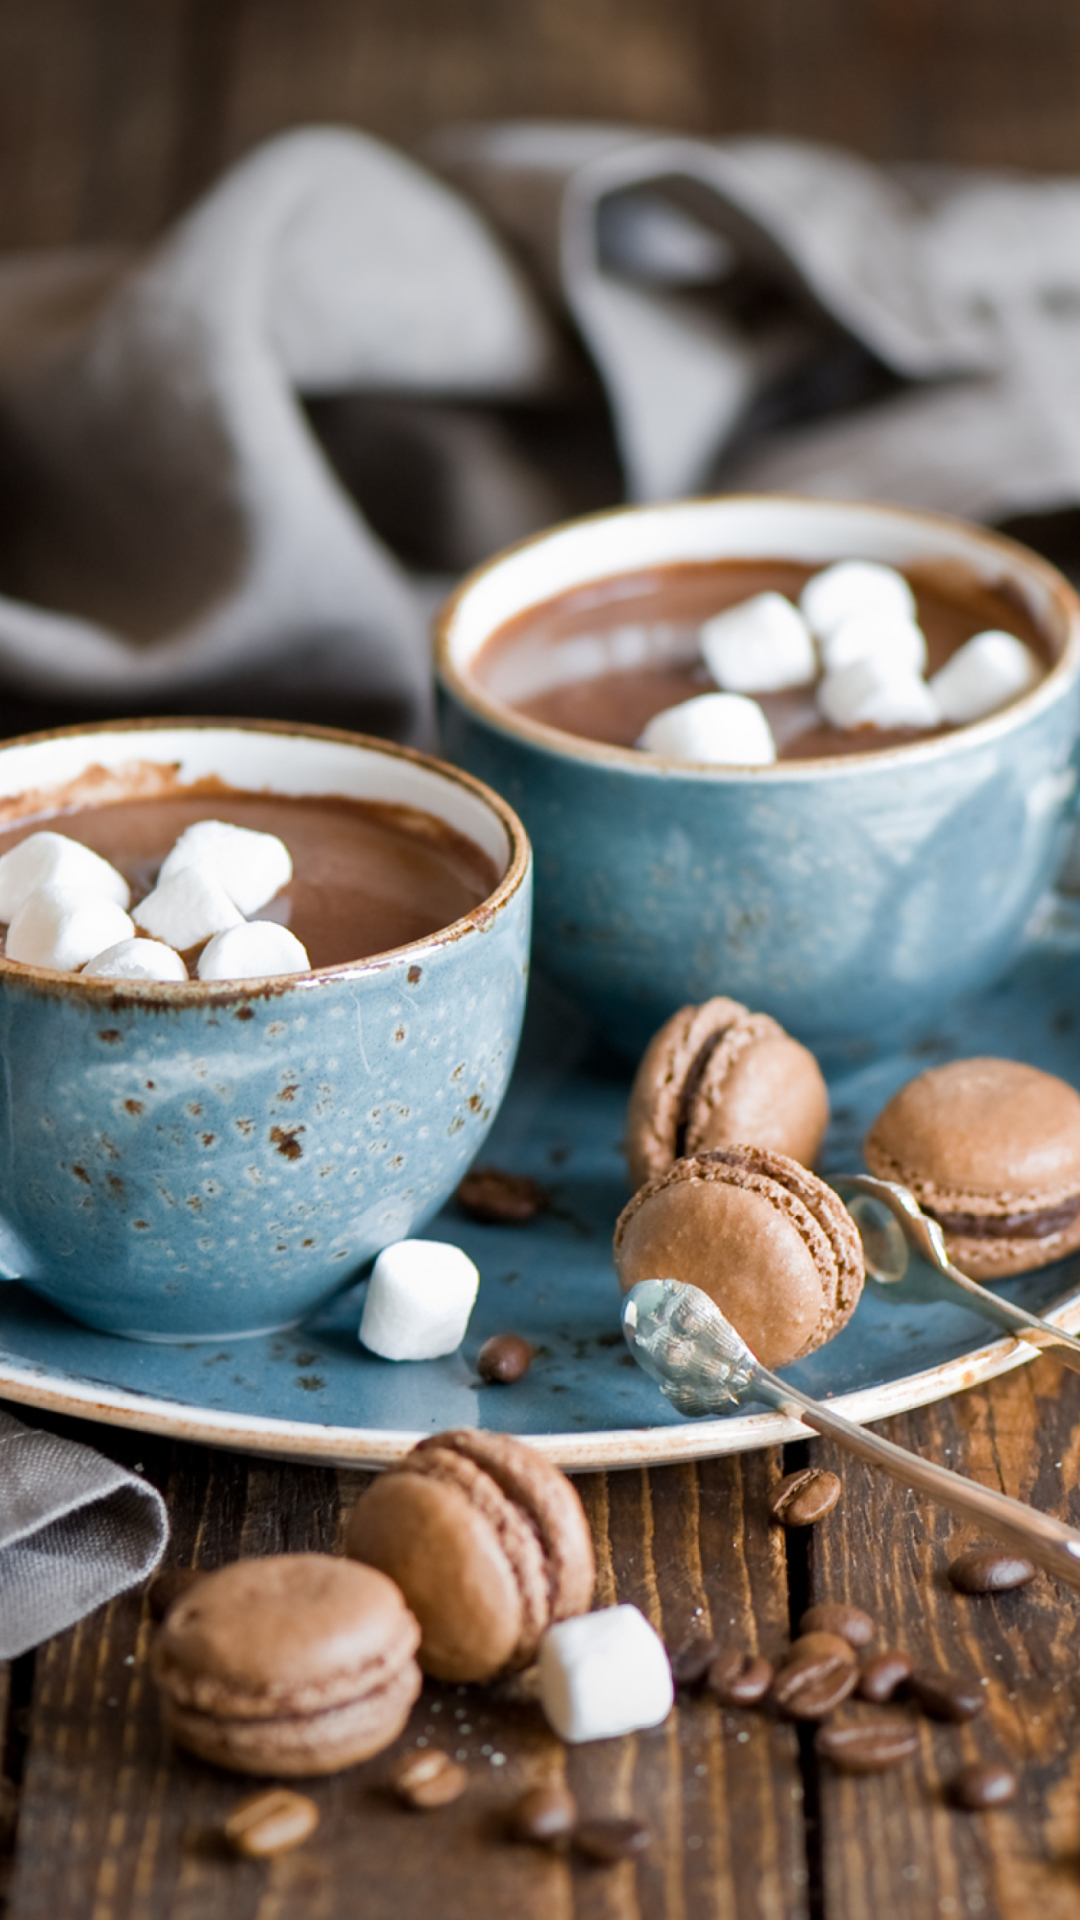 Hot Chocolate With Marshmallows And Macarons wallpaper 1080x1920